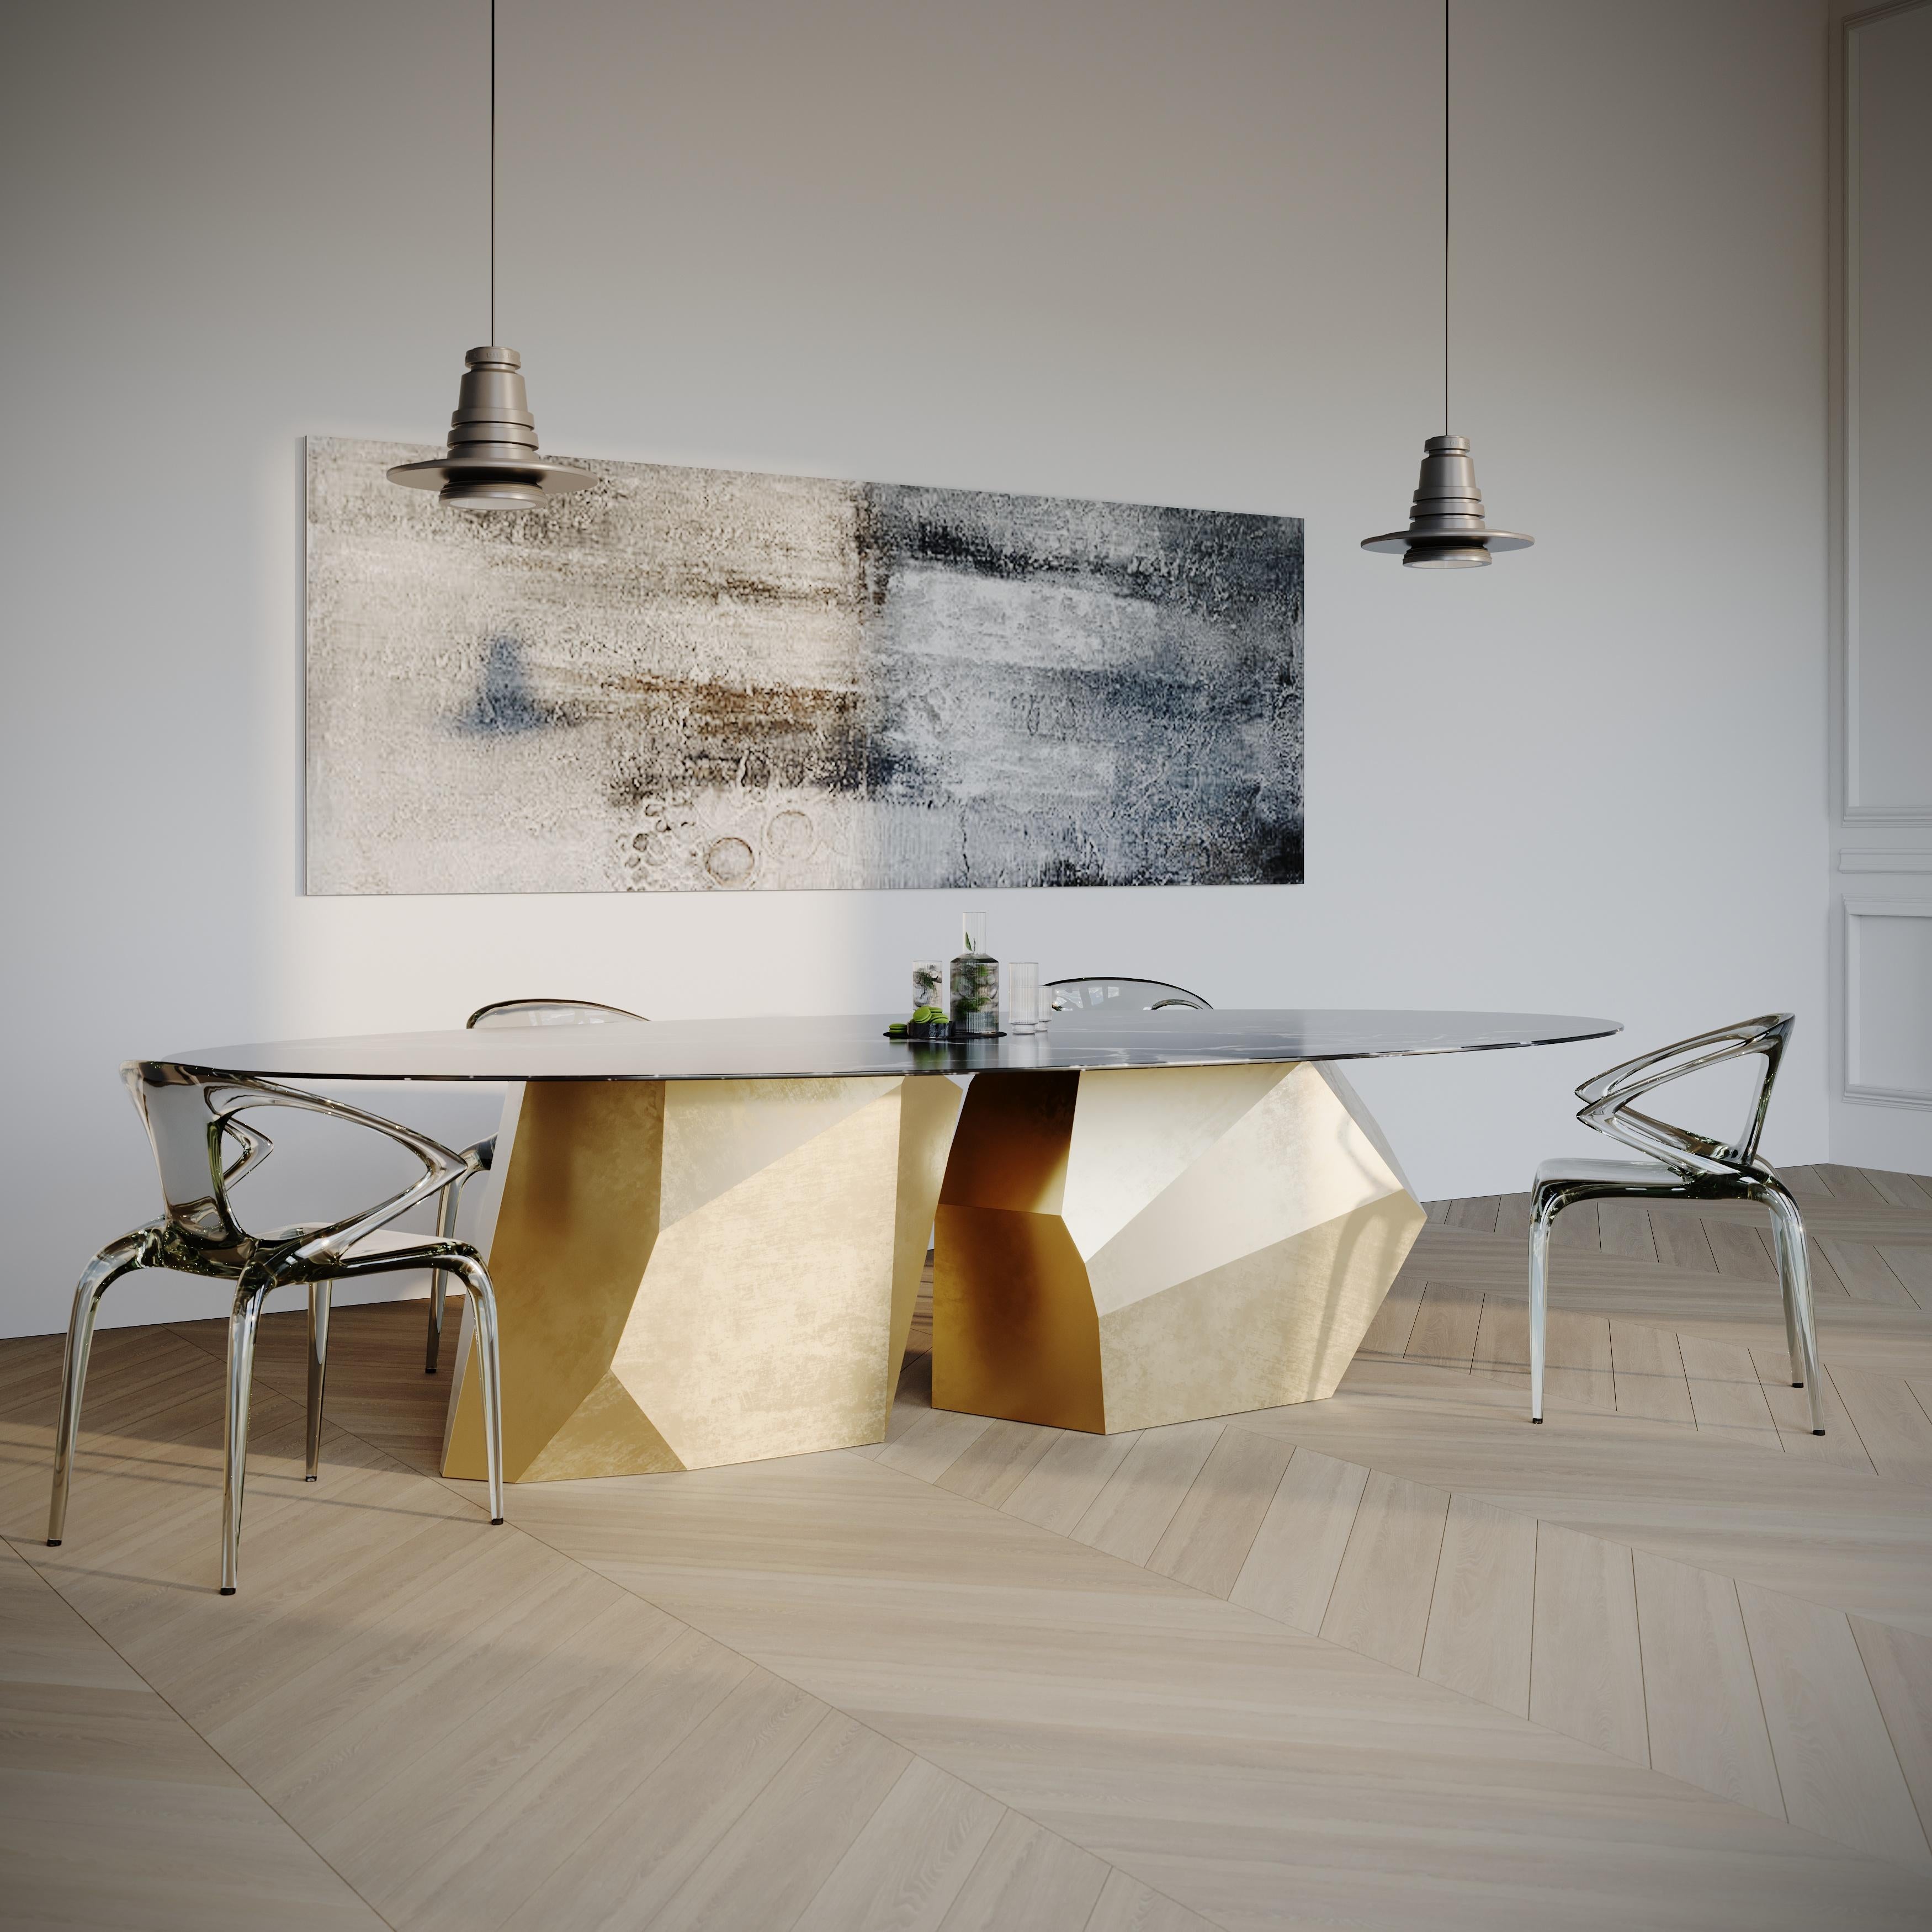 Kronos is the latest modern dining table design within the Solo collection from acclaimed British designer Christopher Duffy. Beautiful contrasting materials of Emperador Italian marble and highly polished metal combine to form a modern statement